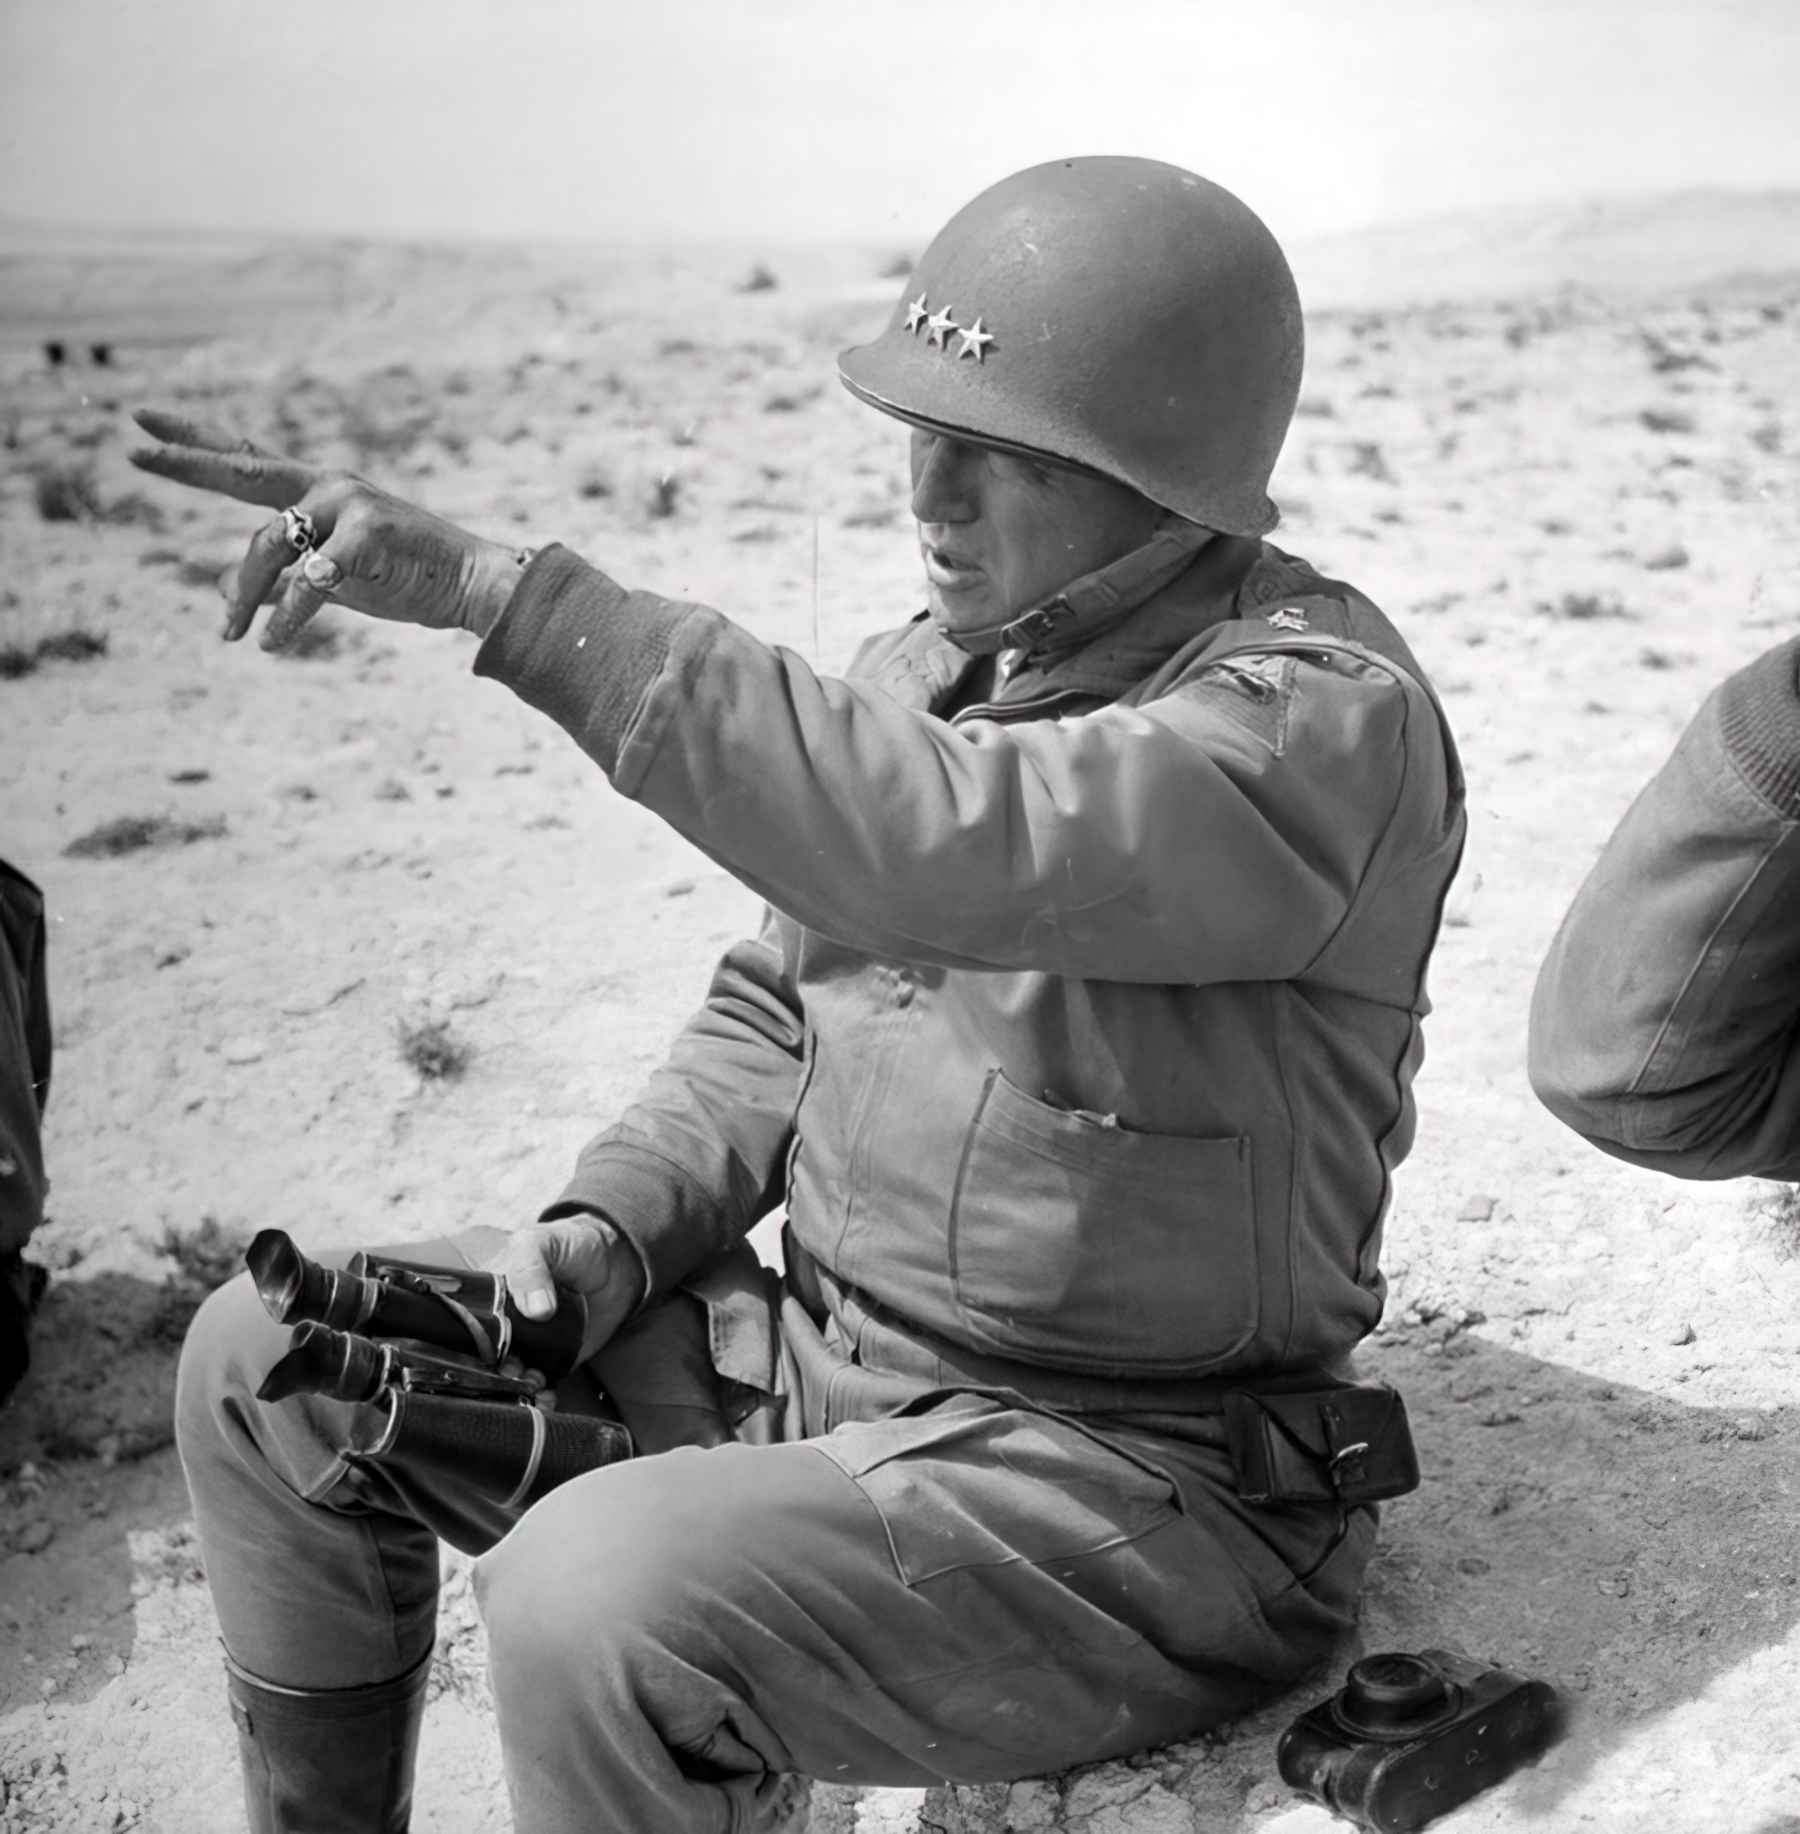 Asisbiz military history North Africa Battle of El Guettar US General George S Patton watches II Corps armored units during the Battle of El Guettar Tunisia 1943